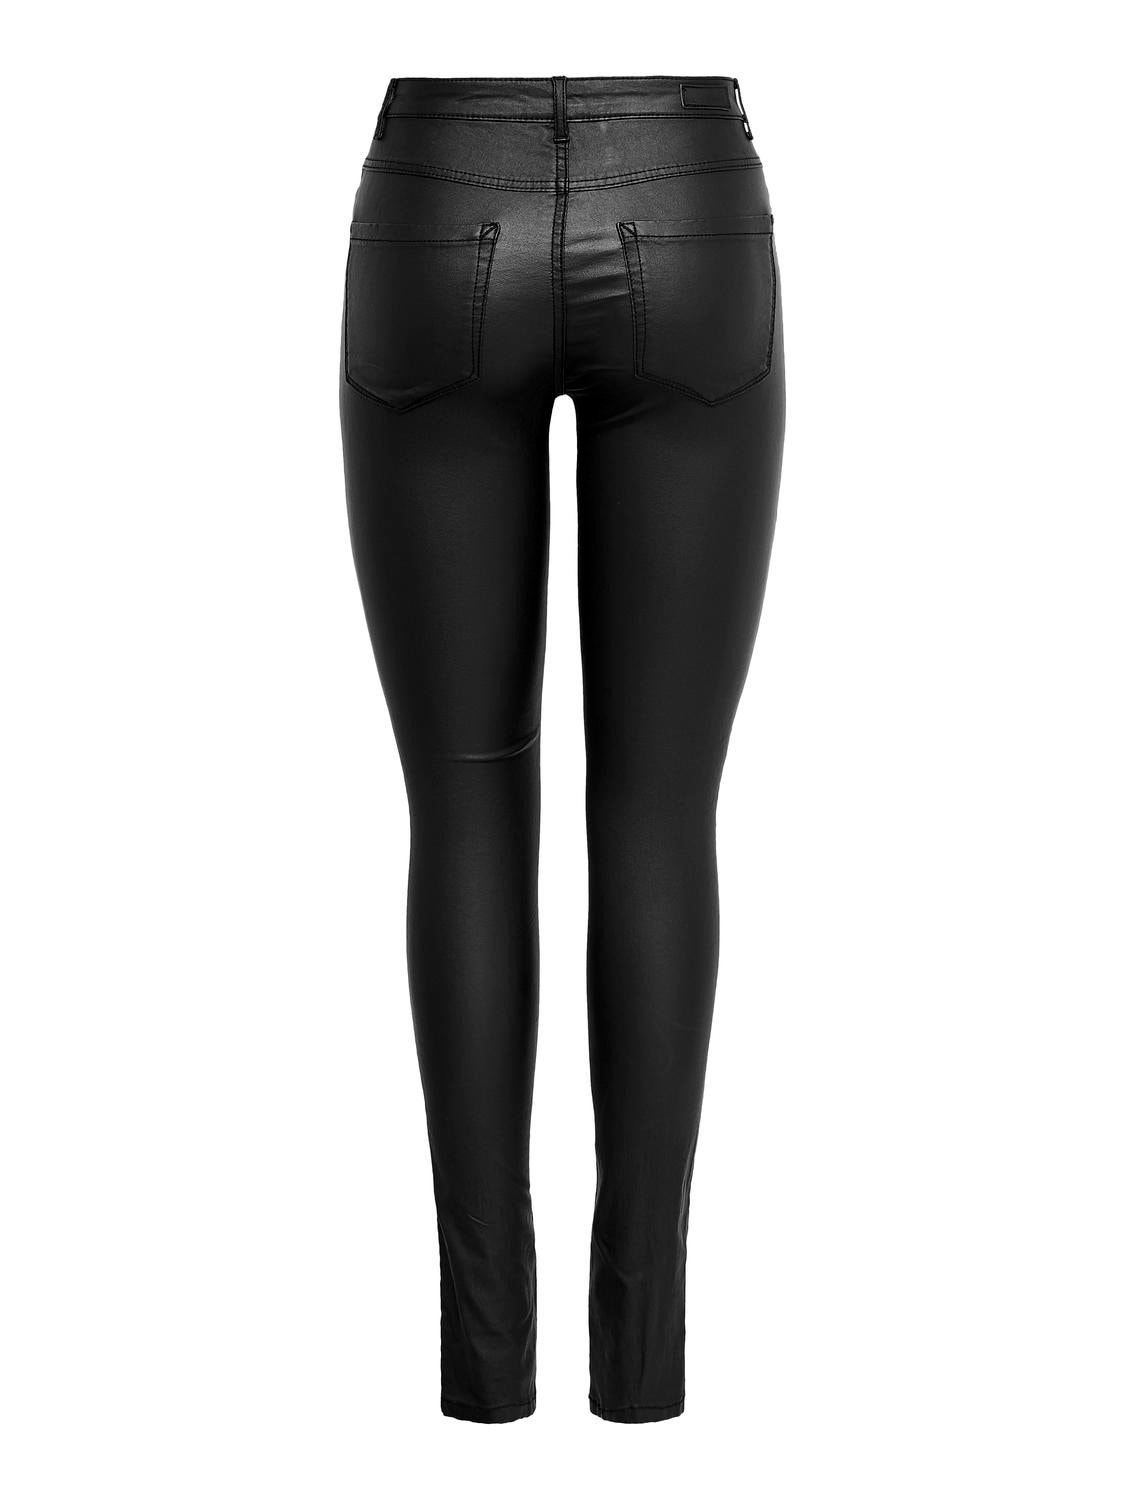 ONLY Skinny Leather Look Coated Trousers in Black  One Nation Clothing  ONLY Skinny Leather Look Coated Trousers in Black 15159341